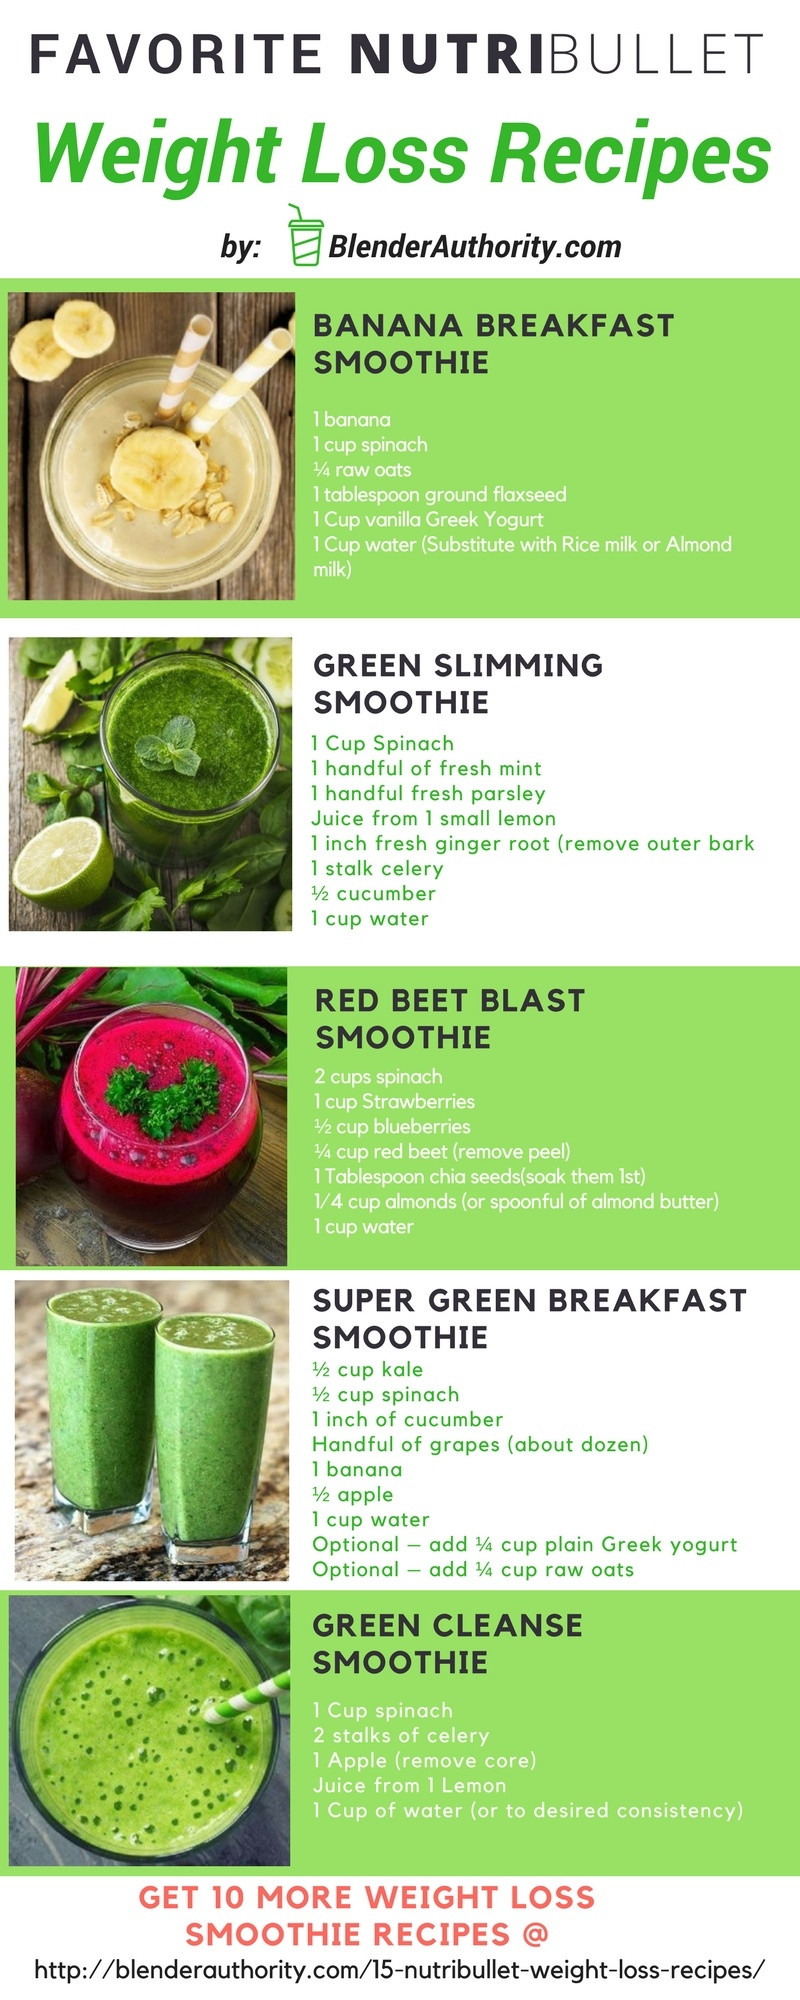 Smoothie Recipes Weight Loss
 Weight Loss Green Smoothie Recipes Uk